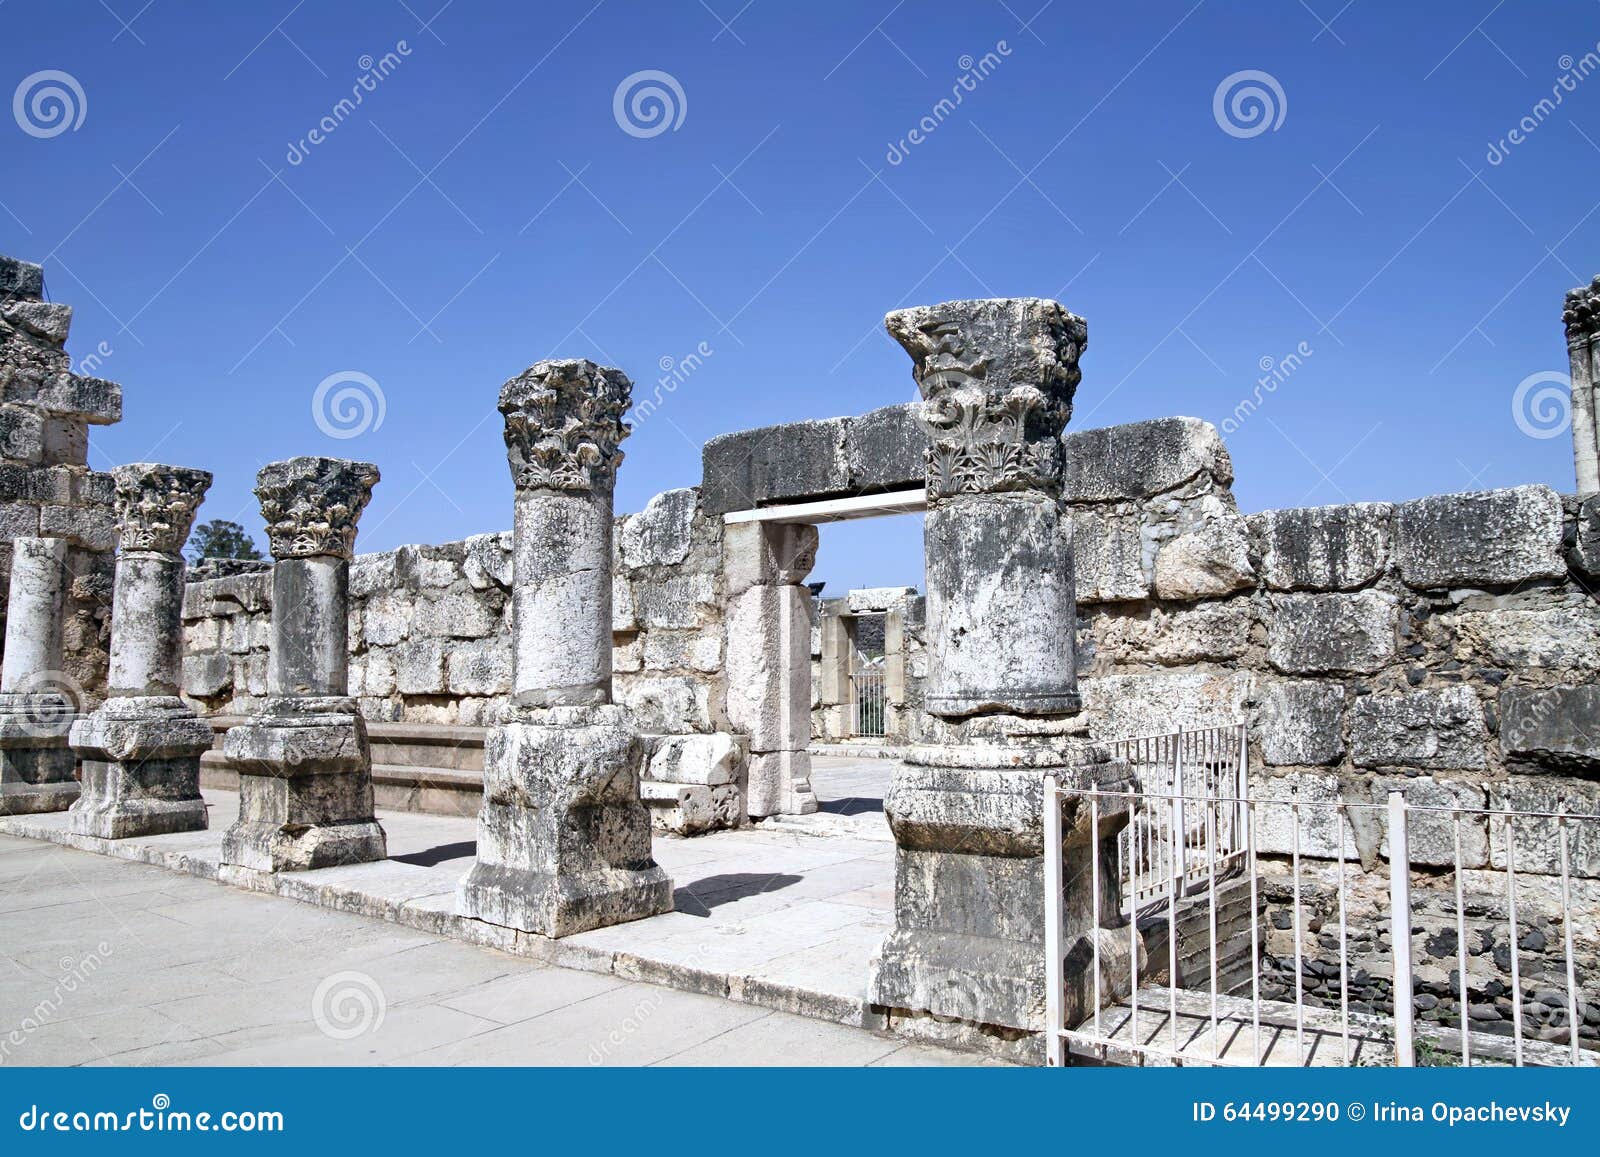 Ruins of the White synagogue in Capernaum. CAPERNAUM, ISRAEL - JUNE 01, 2013: Capernaum - Biblical city on the shores of the Sea of Galilee. Ruins of the White synagogue